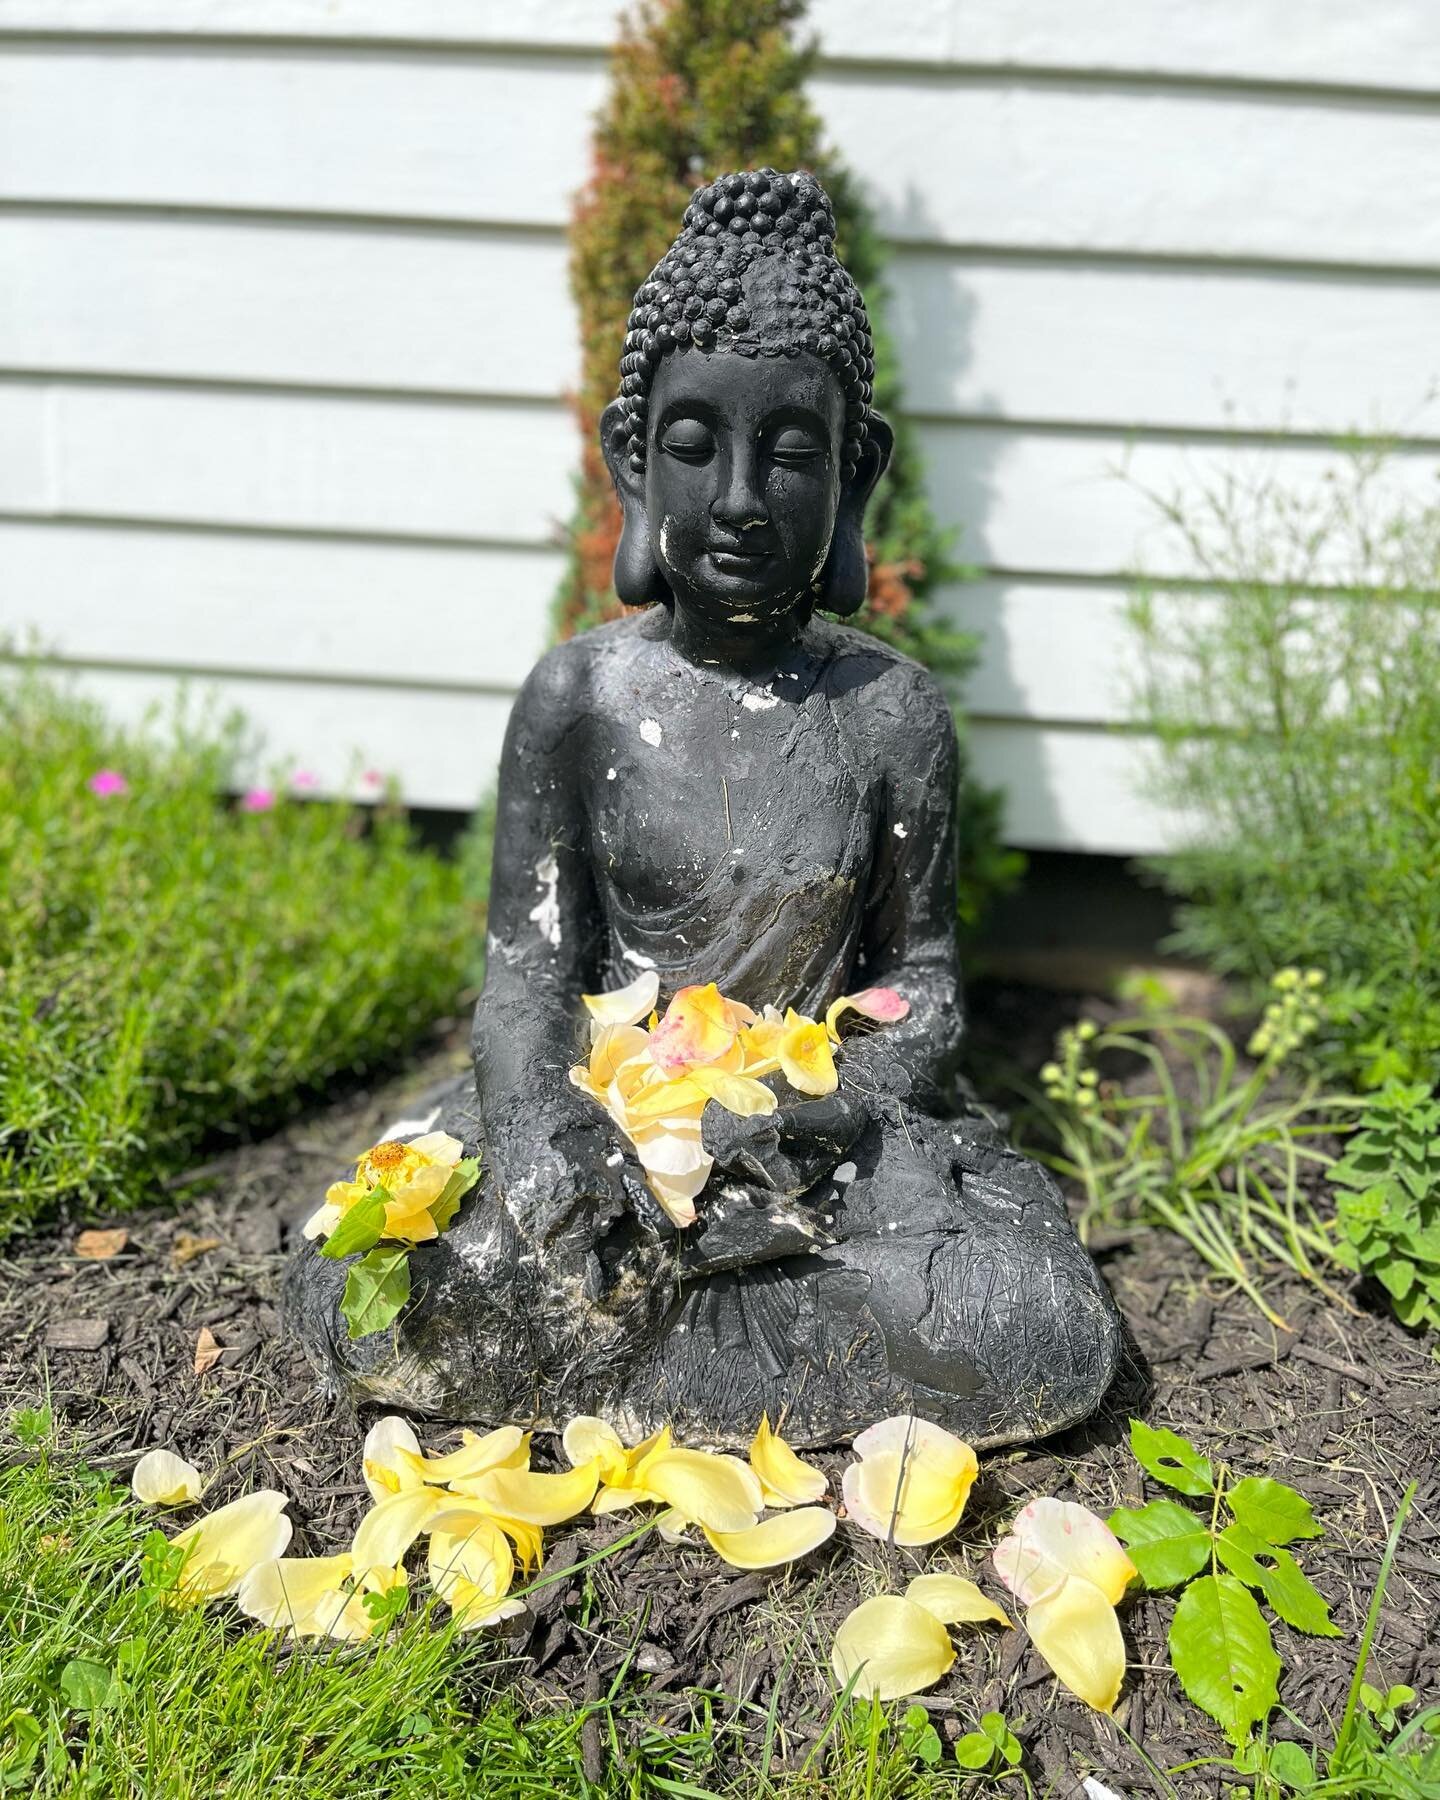 #Healing in #chaos
As I worked in my garden today, I looked at my aging #buddha statue and then at my fallen #rosepetals - 
As I picked up the petals and offered them to my tattered statue I realized that - even when things appear to be falling apart